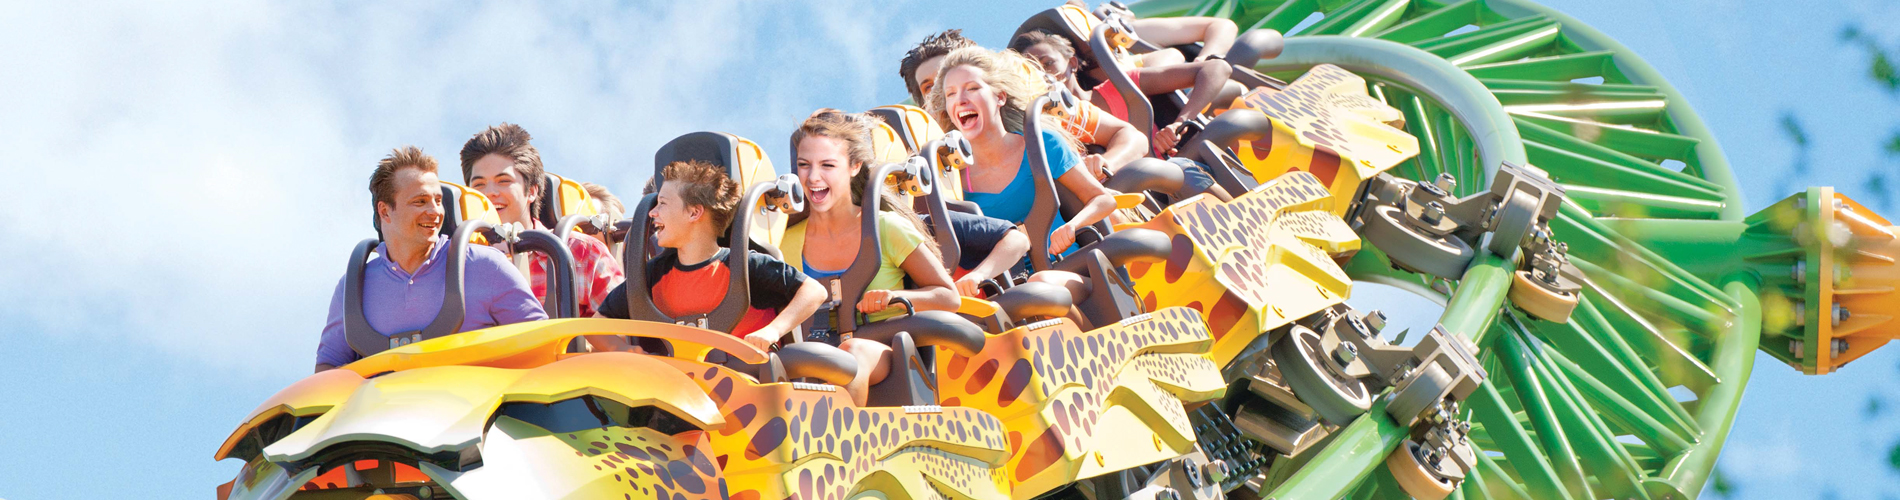 Busch Gardens® Tampa Bay offers a unique blend of world-class roller coasters, live shows and more than 12,000 animals.